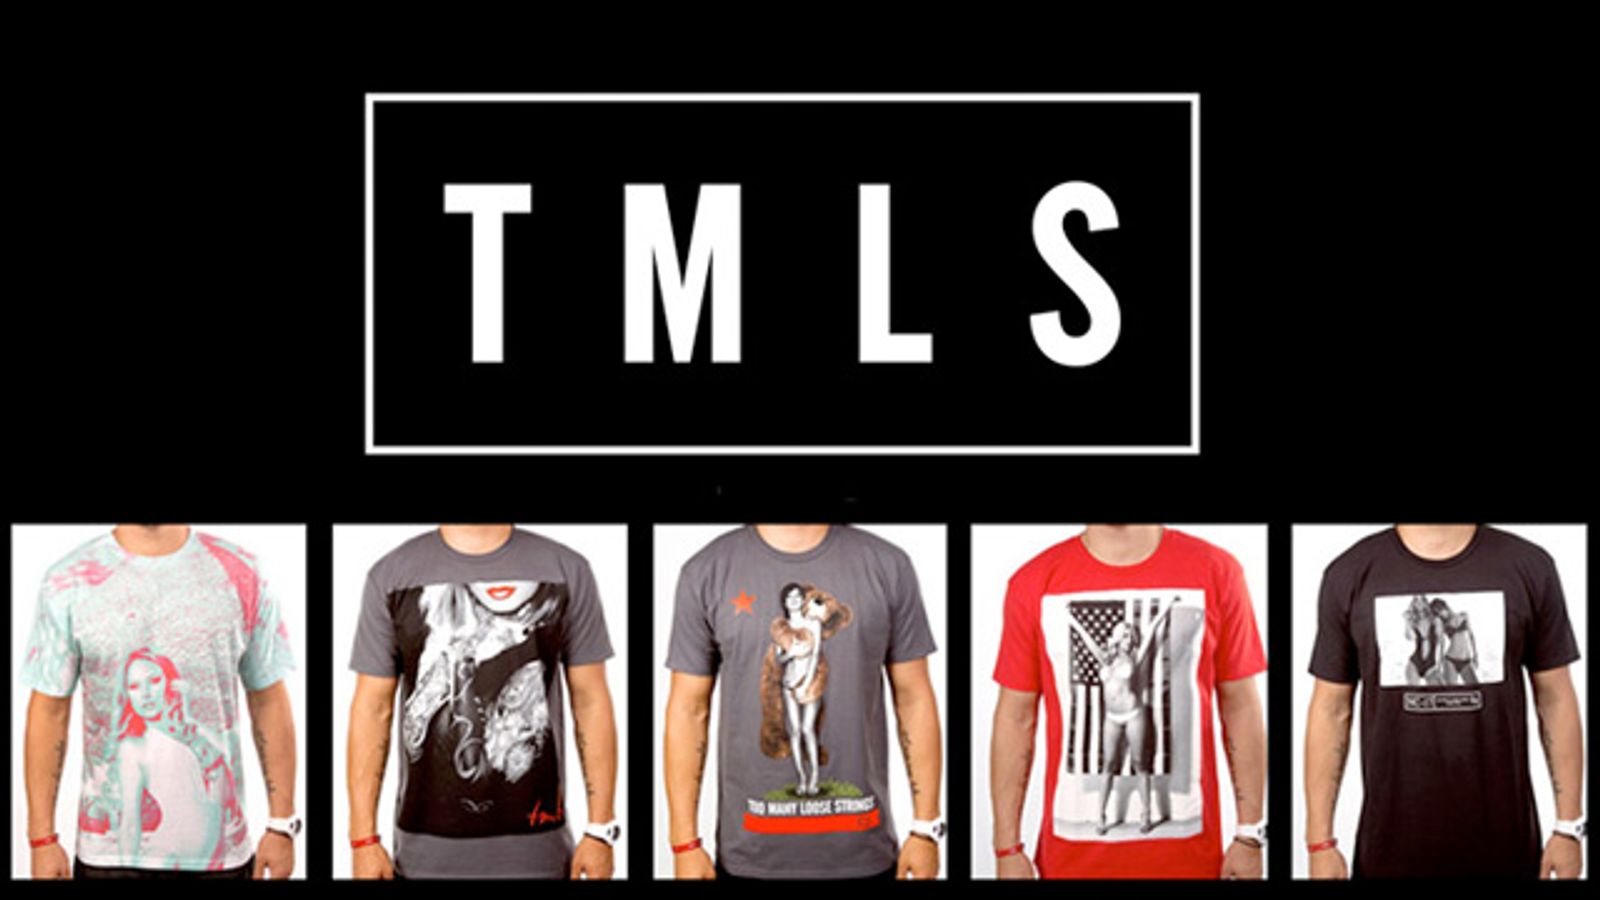 Two In The Shirt Drops New Tees Under TMLS Division